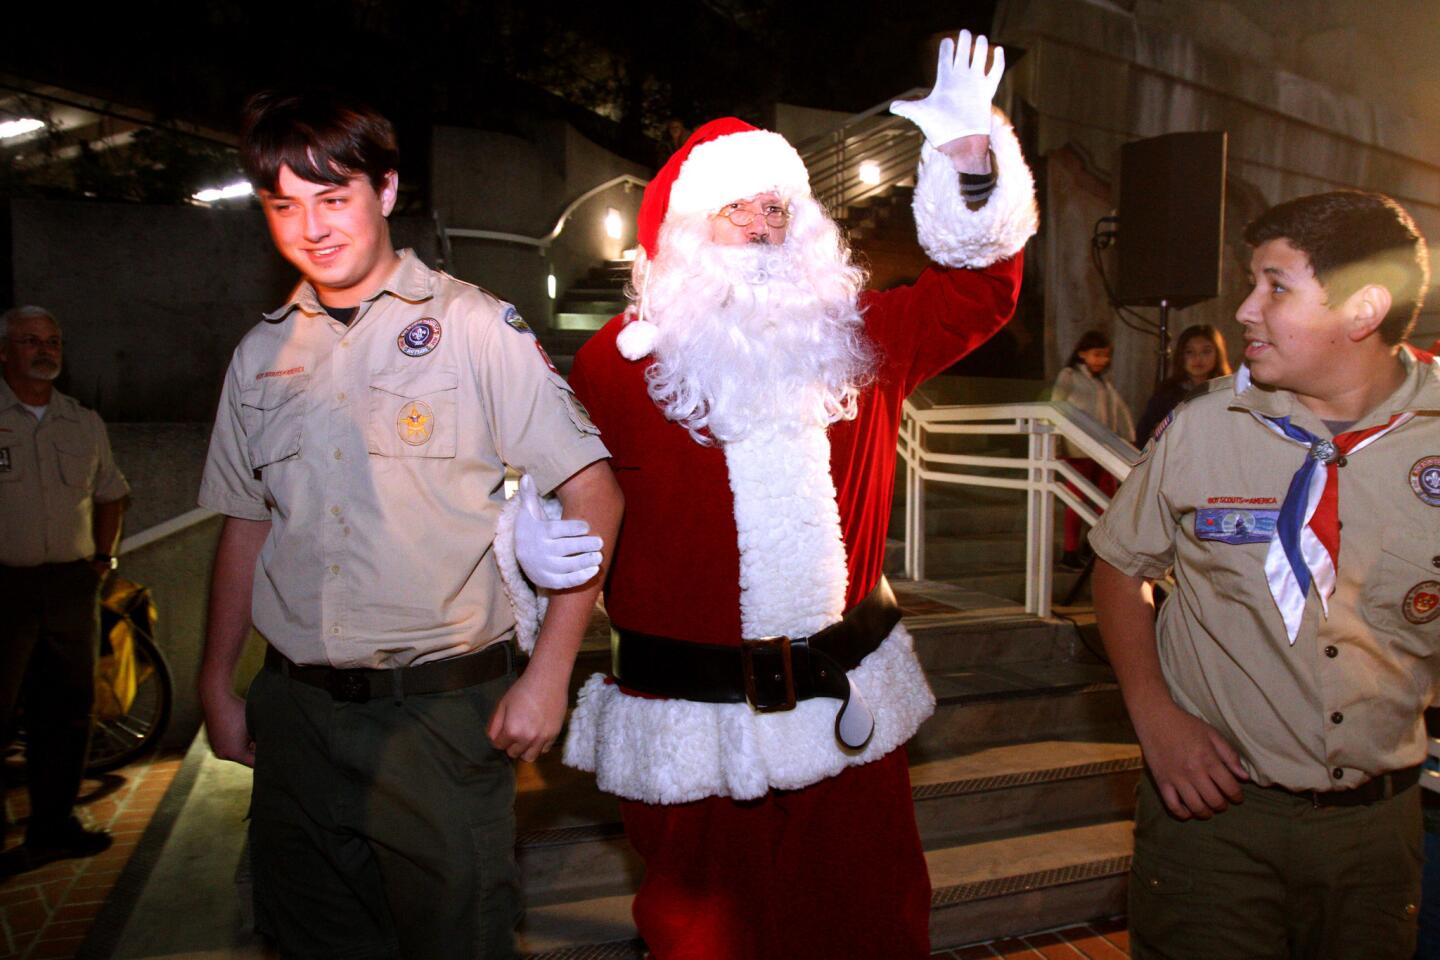 Santa Claus made an appearance after the tree lighting ceremony at Perkins Plaza in Glendale on Wednesday, Dec. 2, 2015.